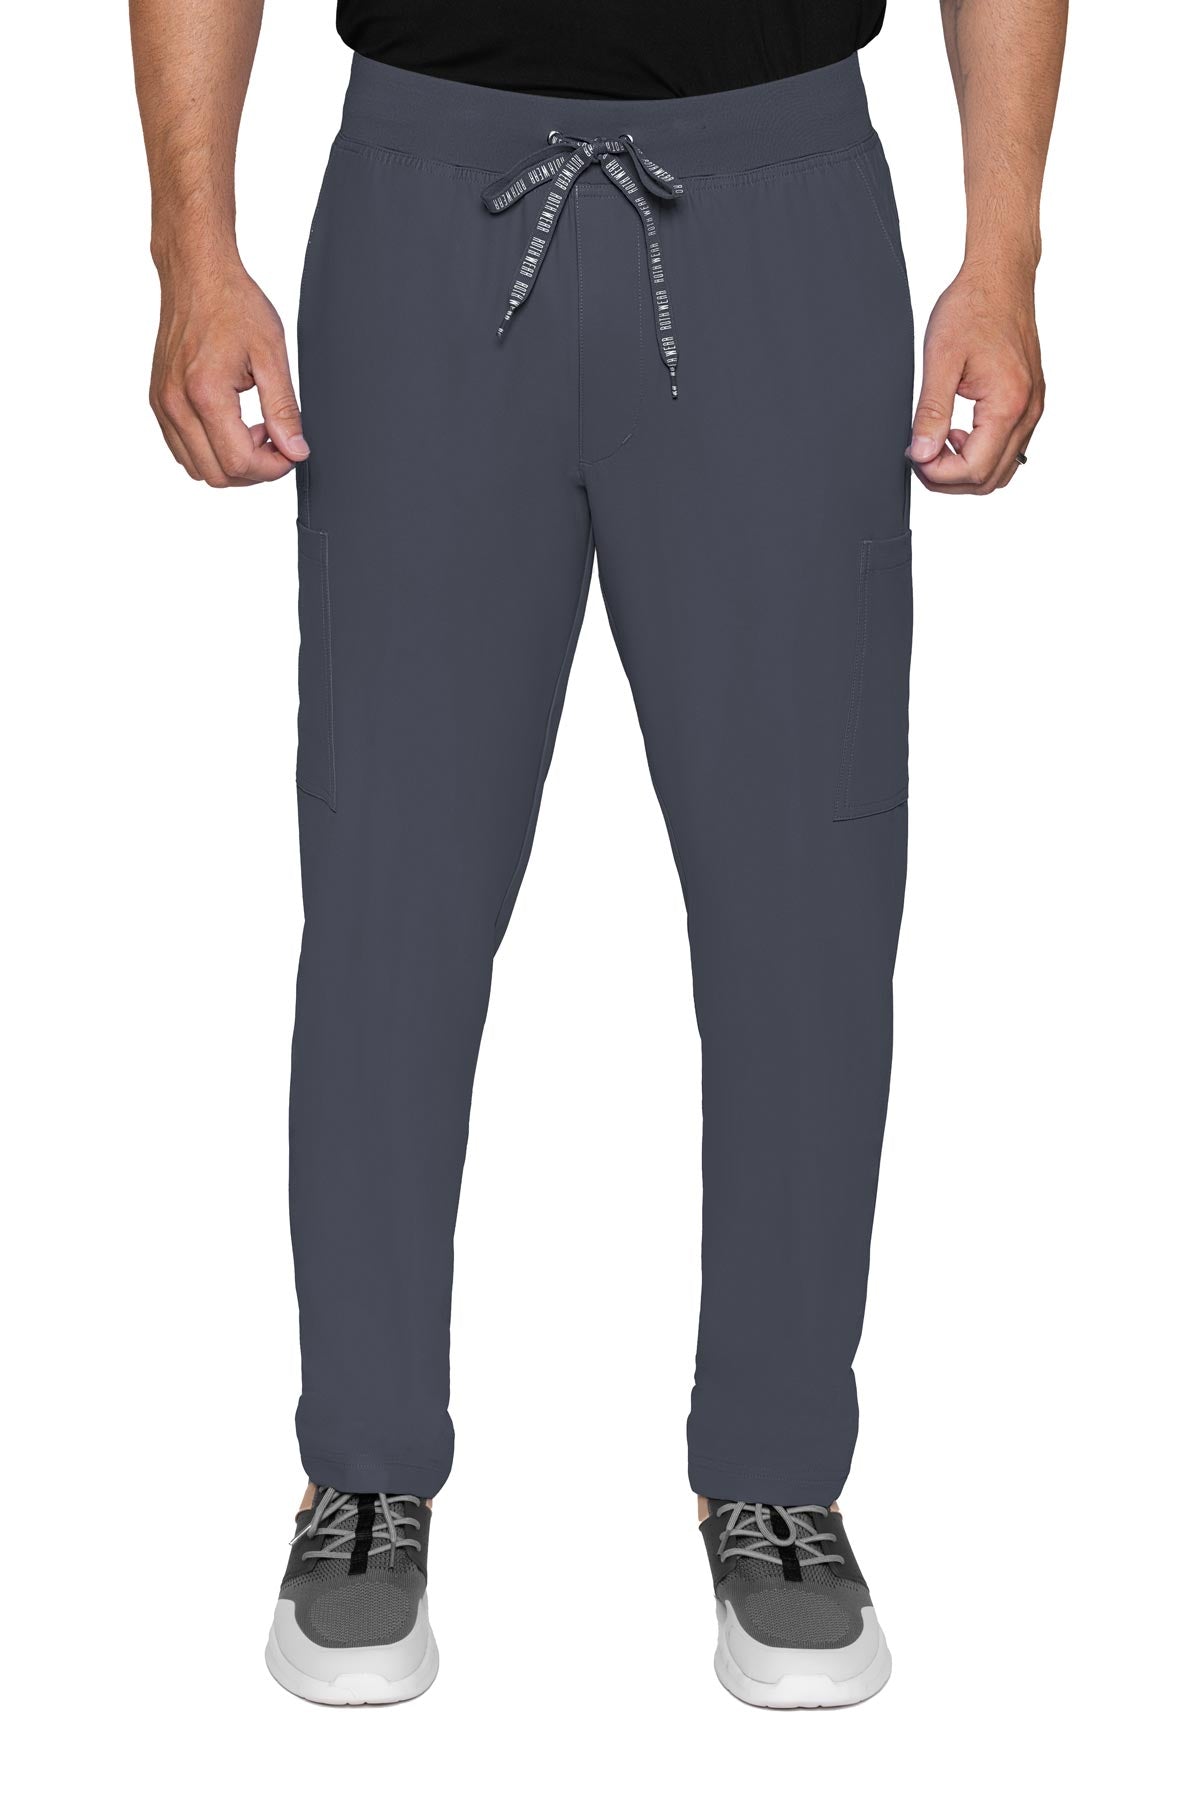 Med Couture Mens Scrub Pants RothWear Insight in pewter at Parker's Clothing and Shoes.